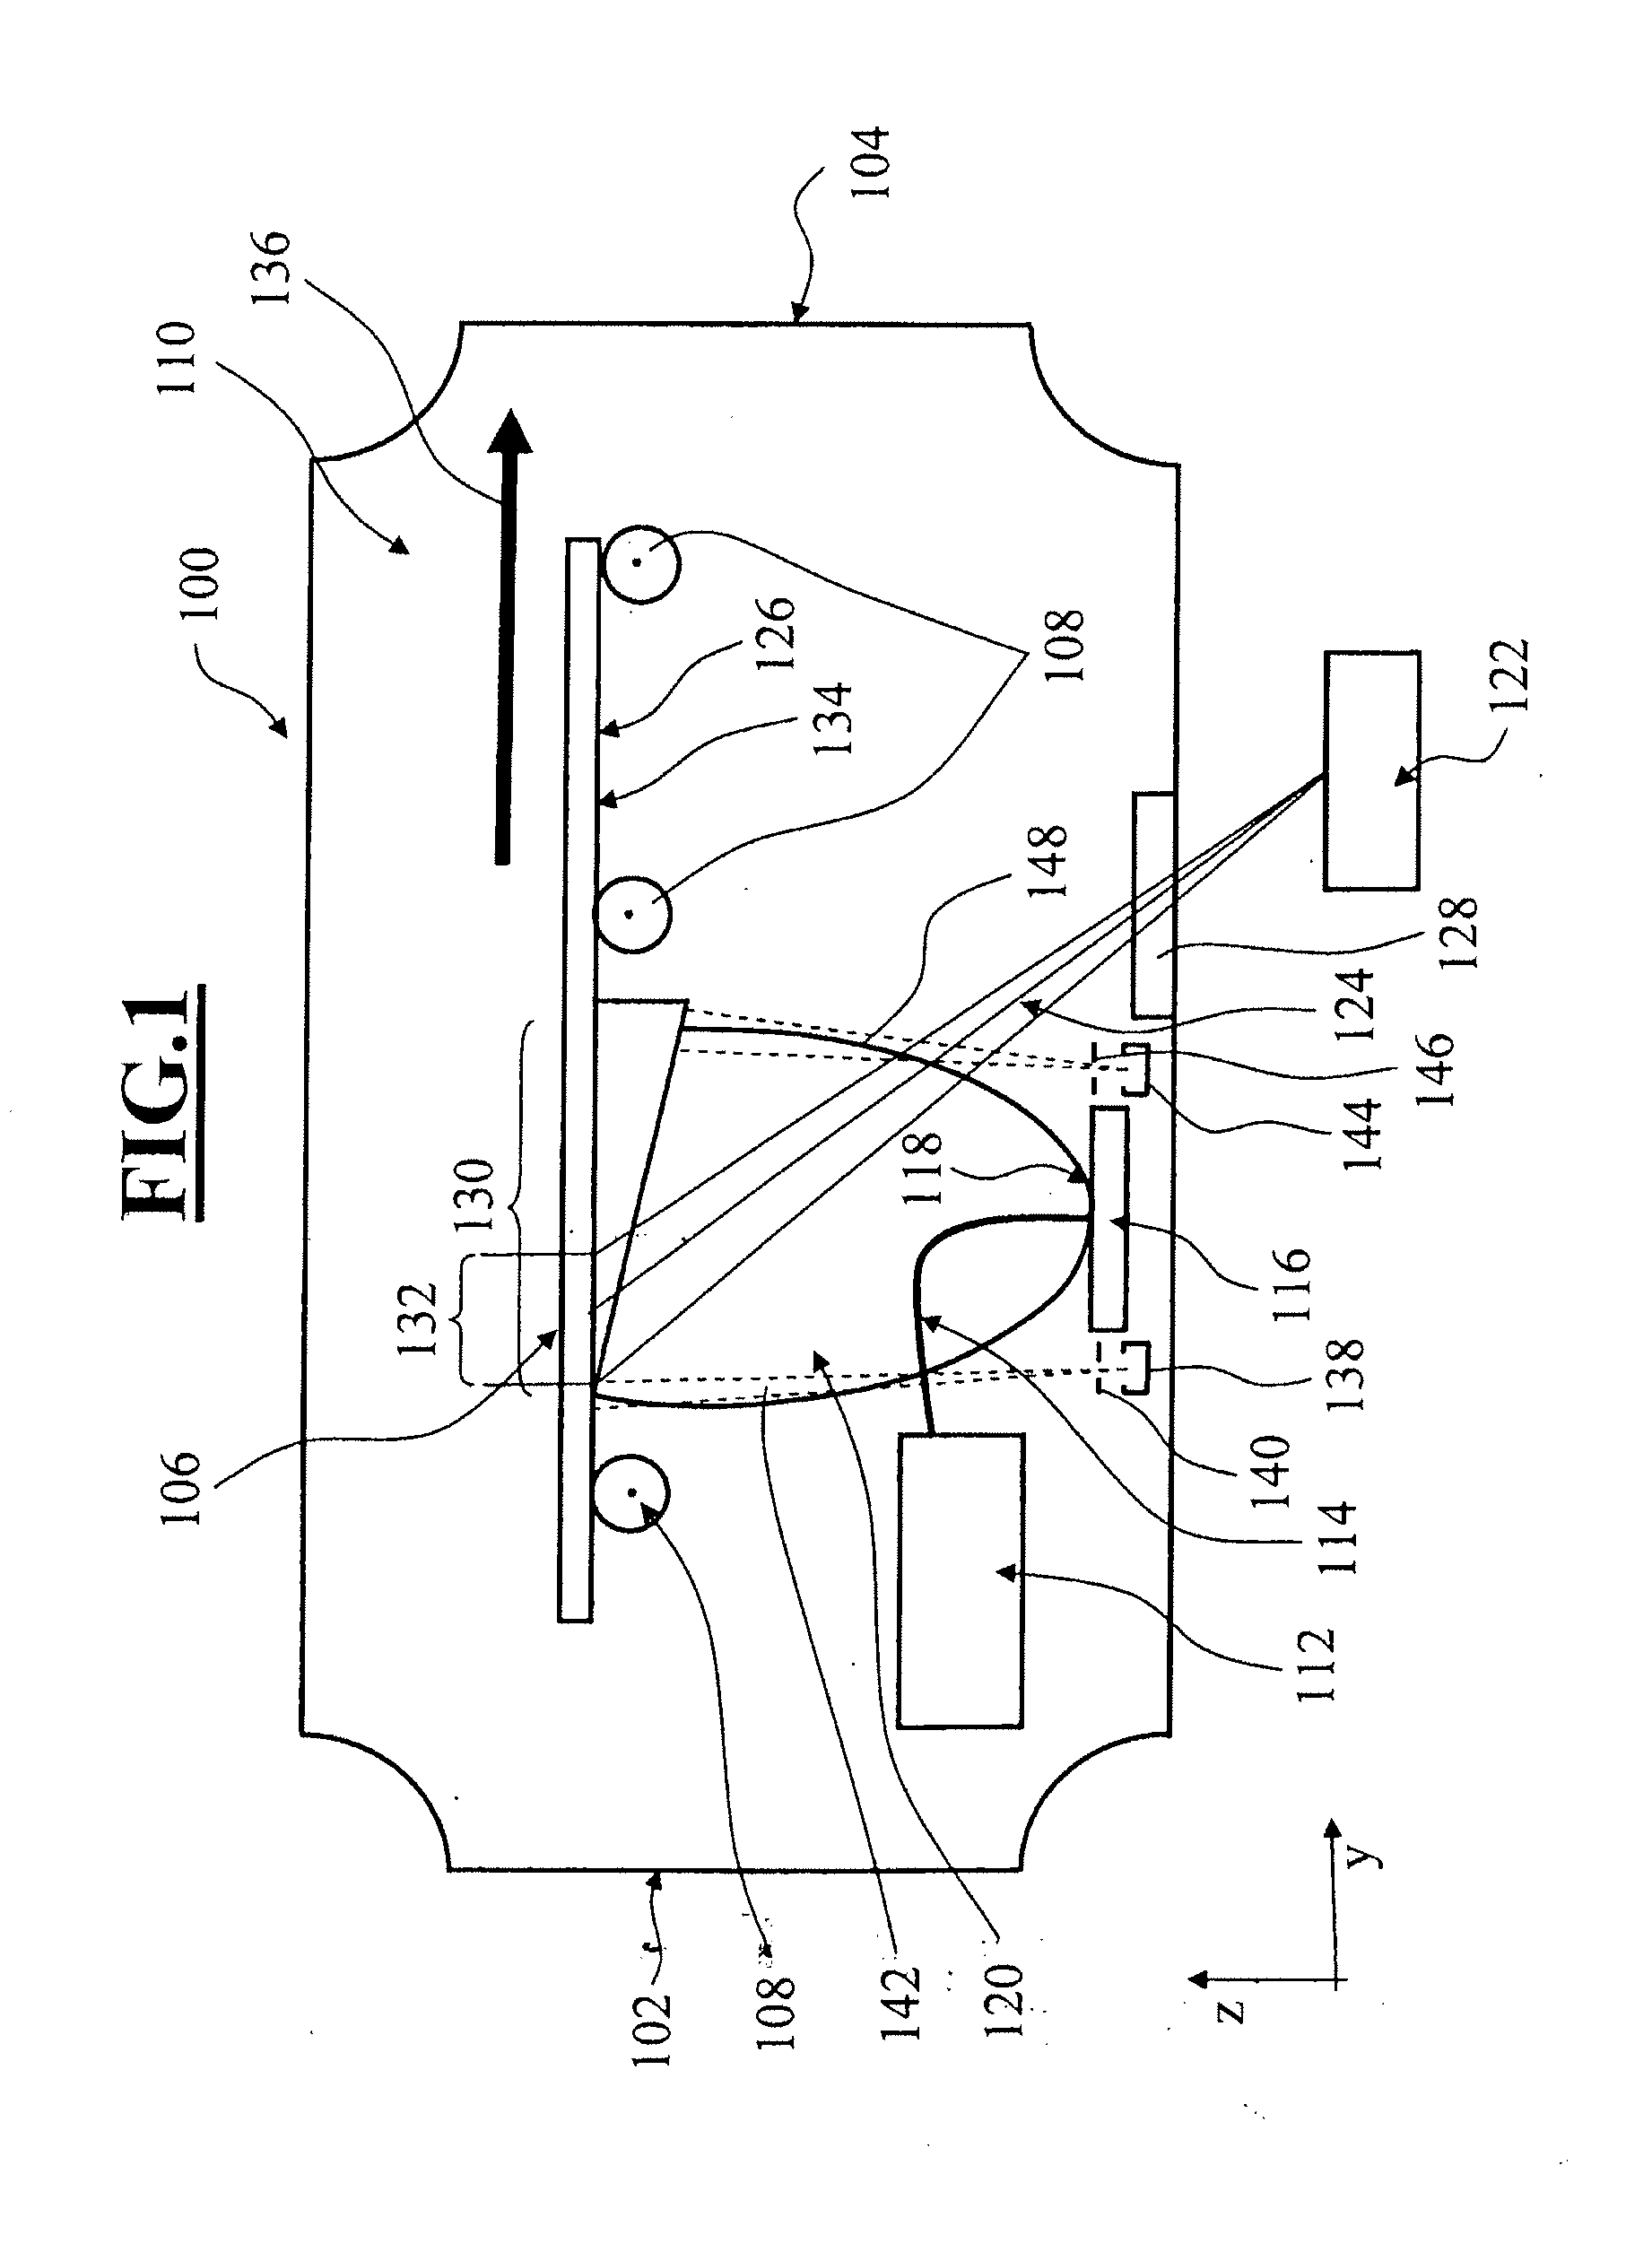 Continuous coating installation, methods for producing crystalline solar cells, and solar cell